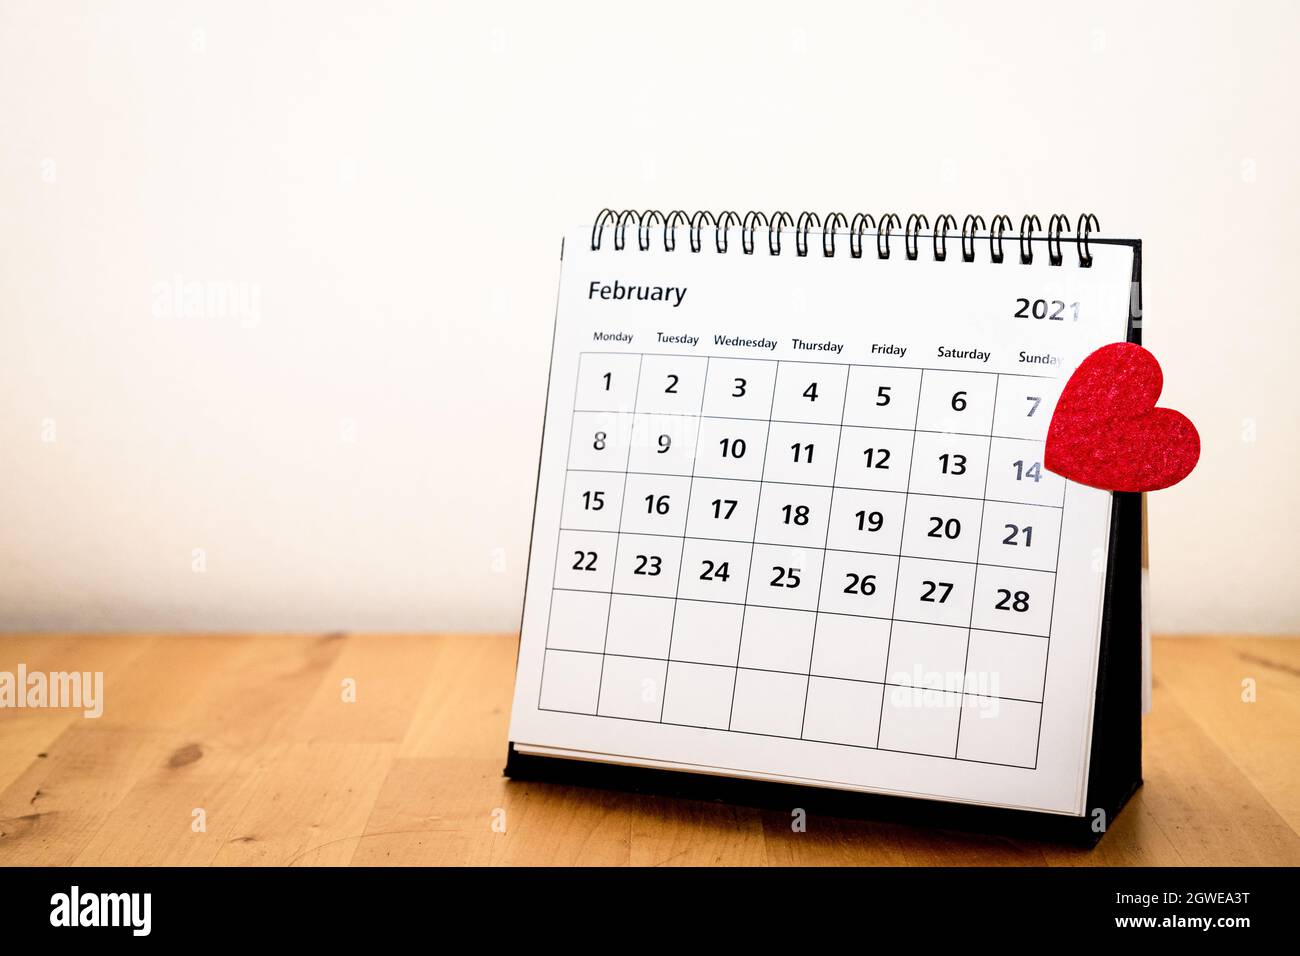 February 2021 Calendar Month Page With St. Valentine's Day 14th Checked By Red Heart Stock Photo